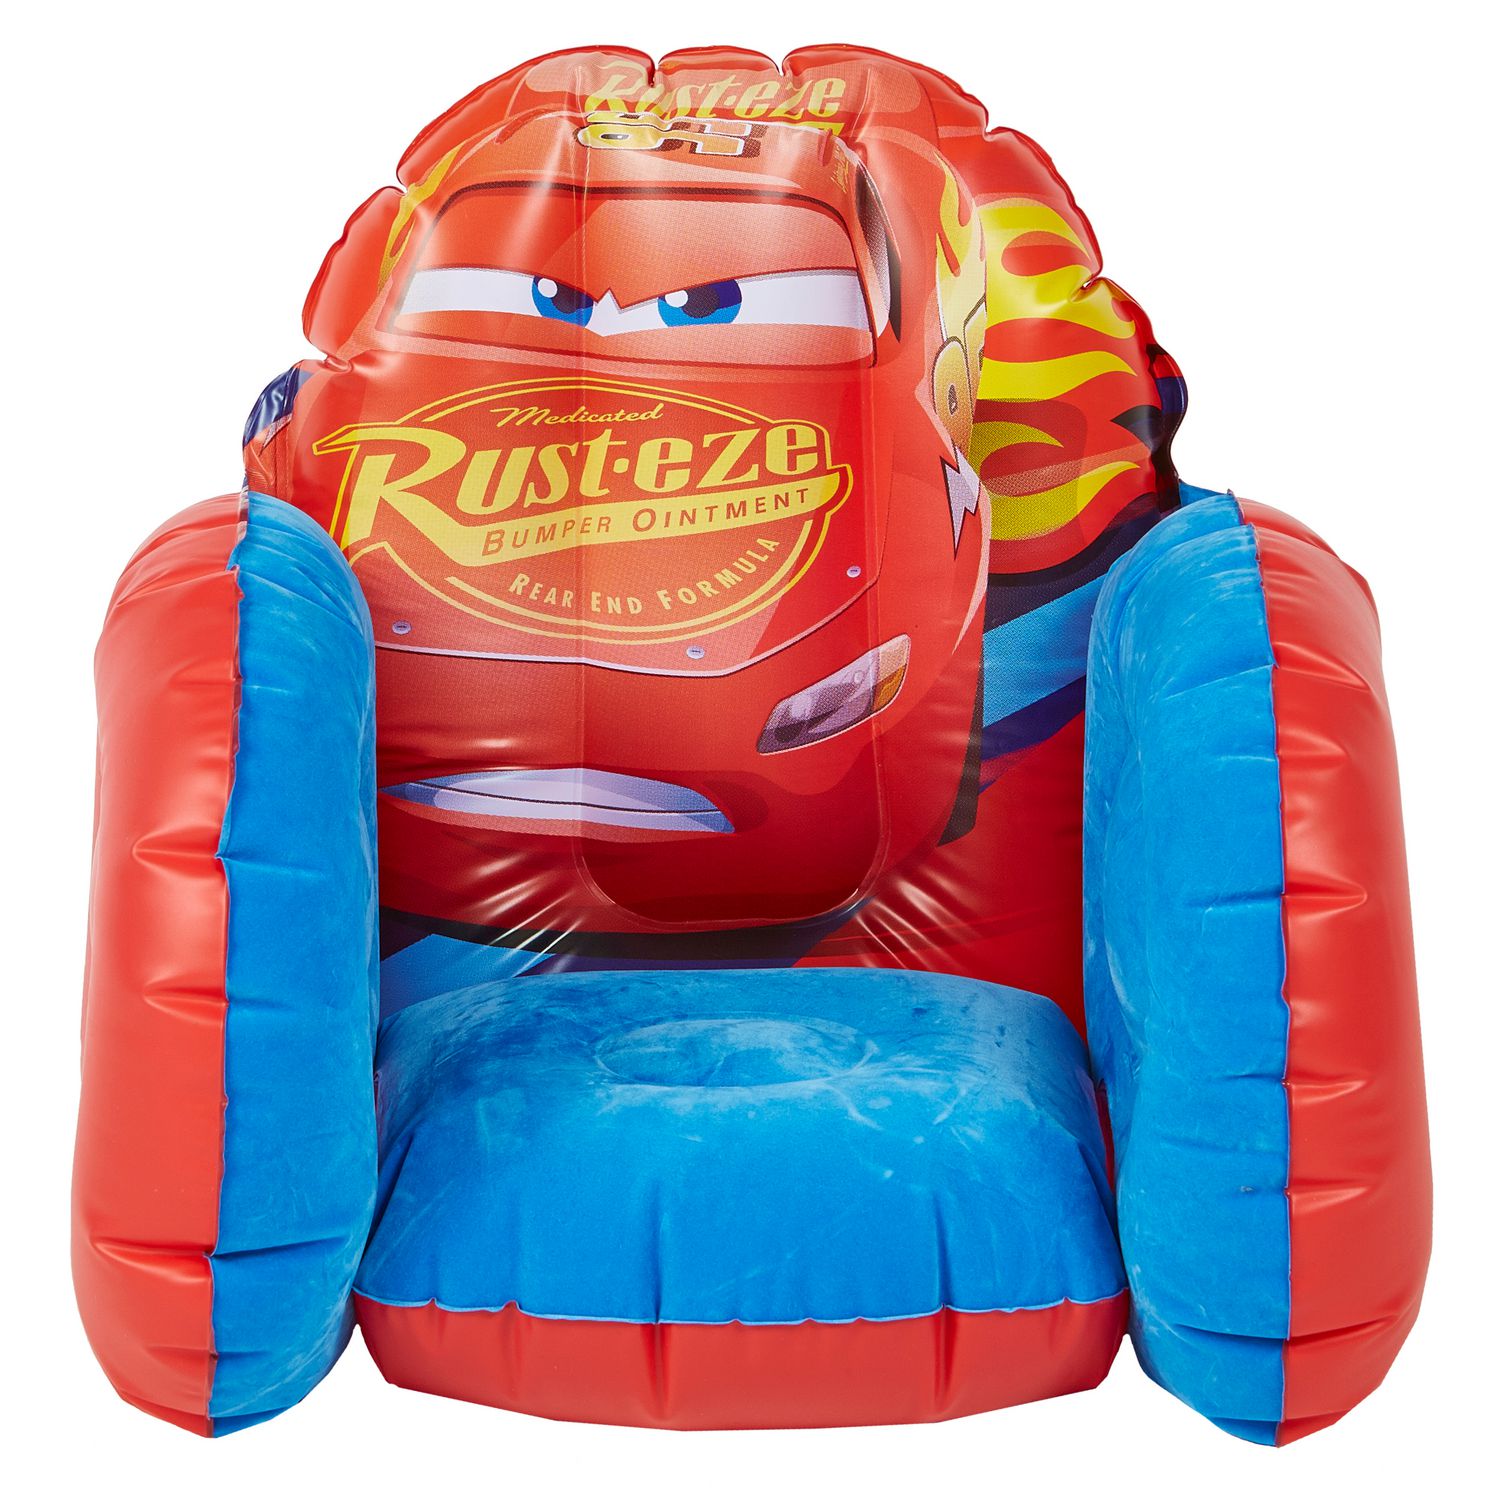 NEW KIDS DISNEY RACING CARS THINK FAST RED INFLATABLE CHAIR BEST GIFTS 3+